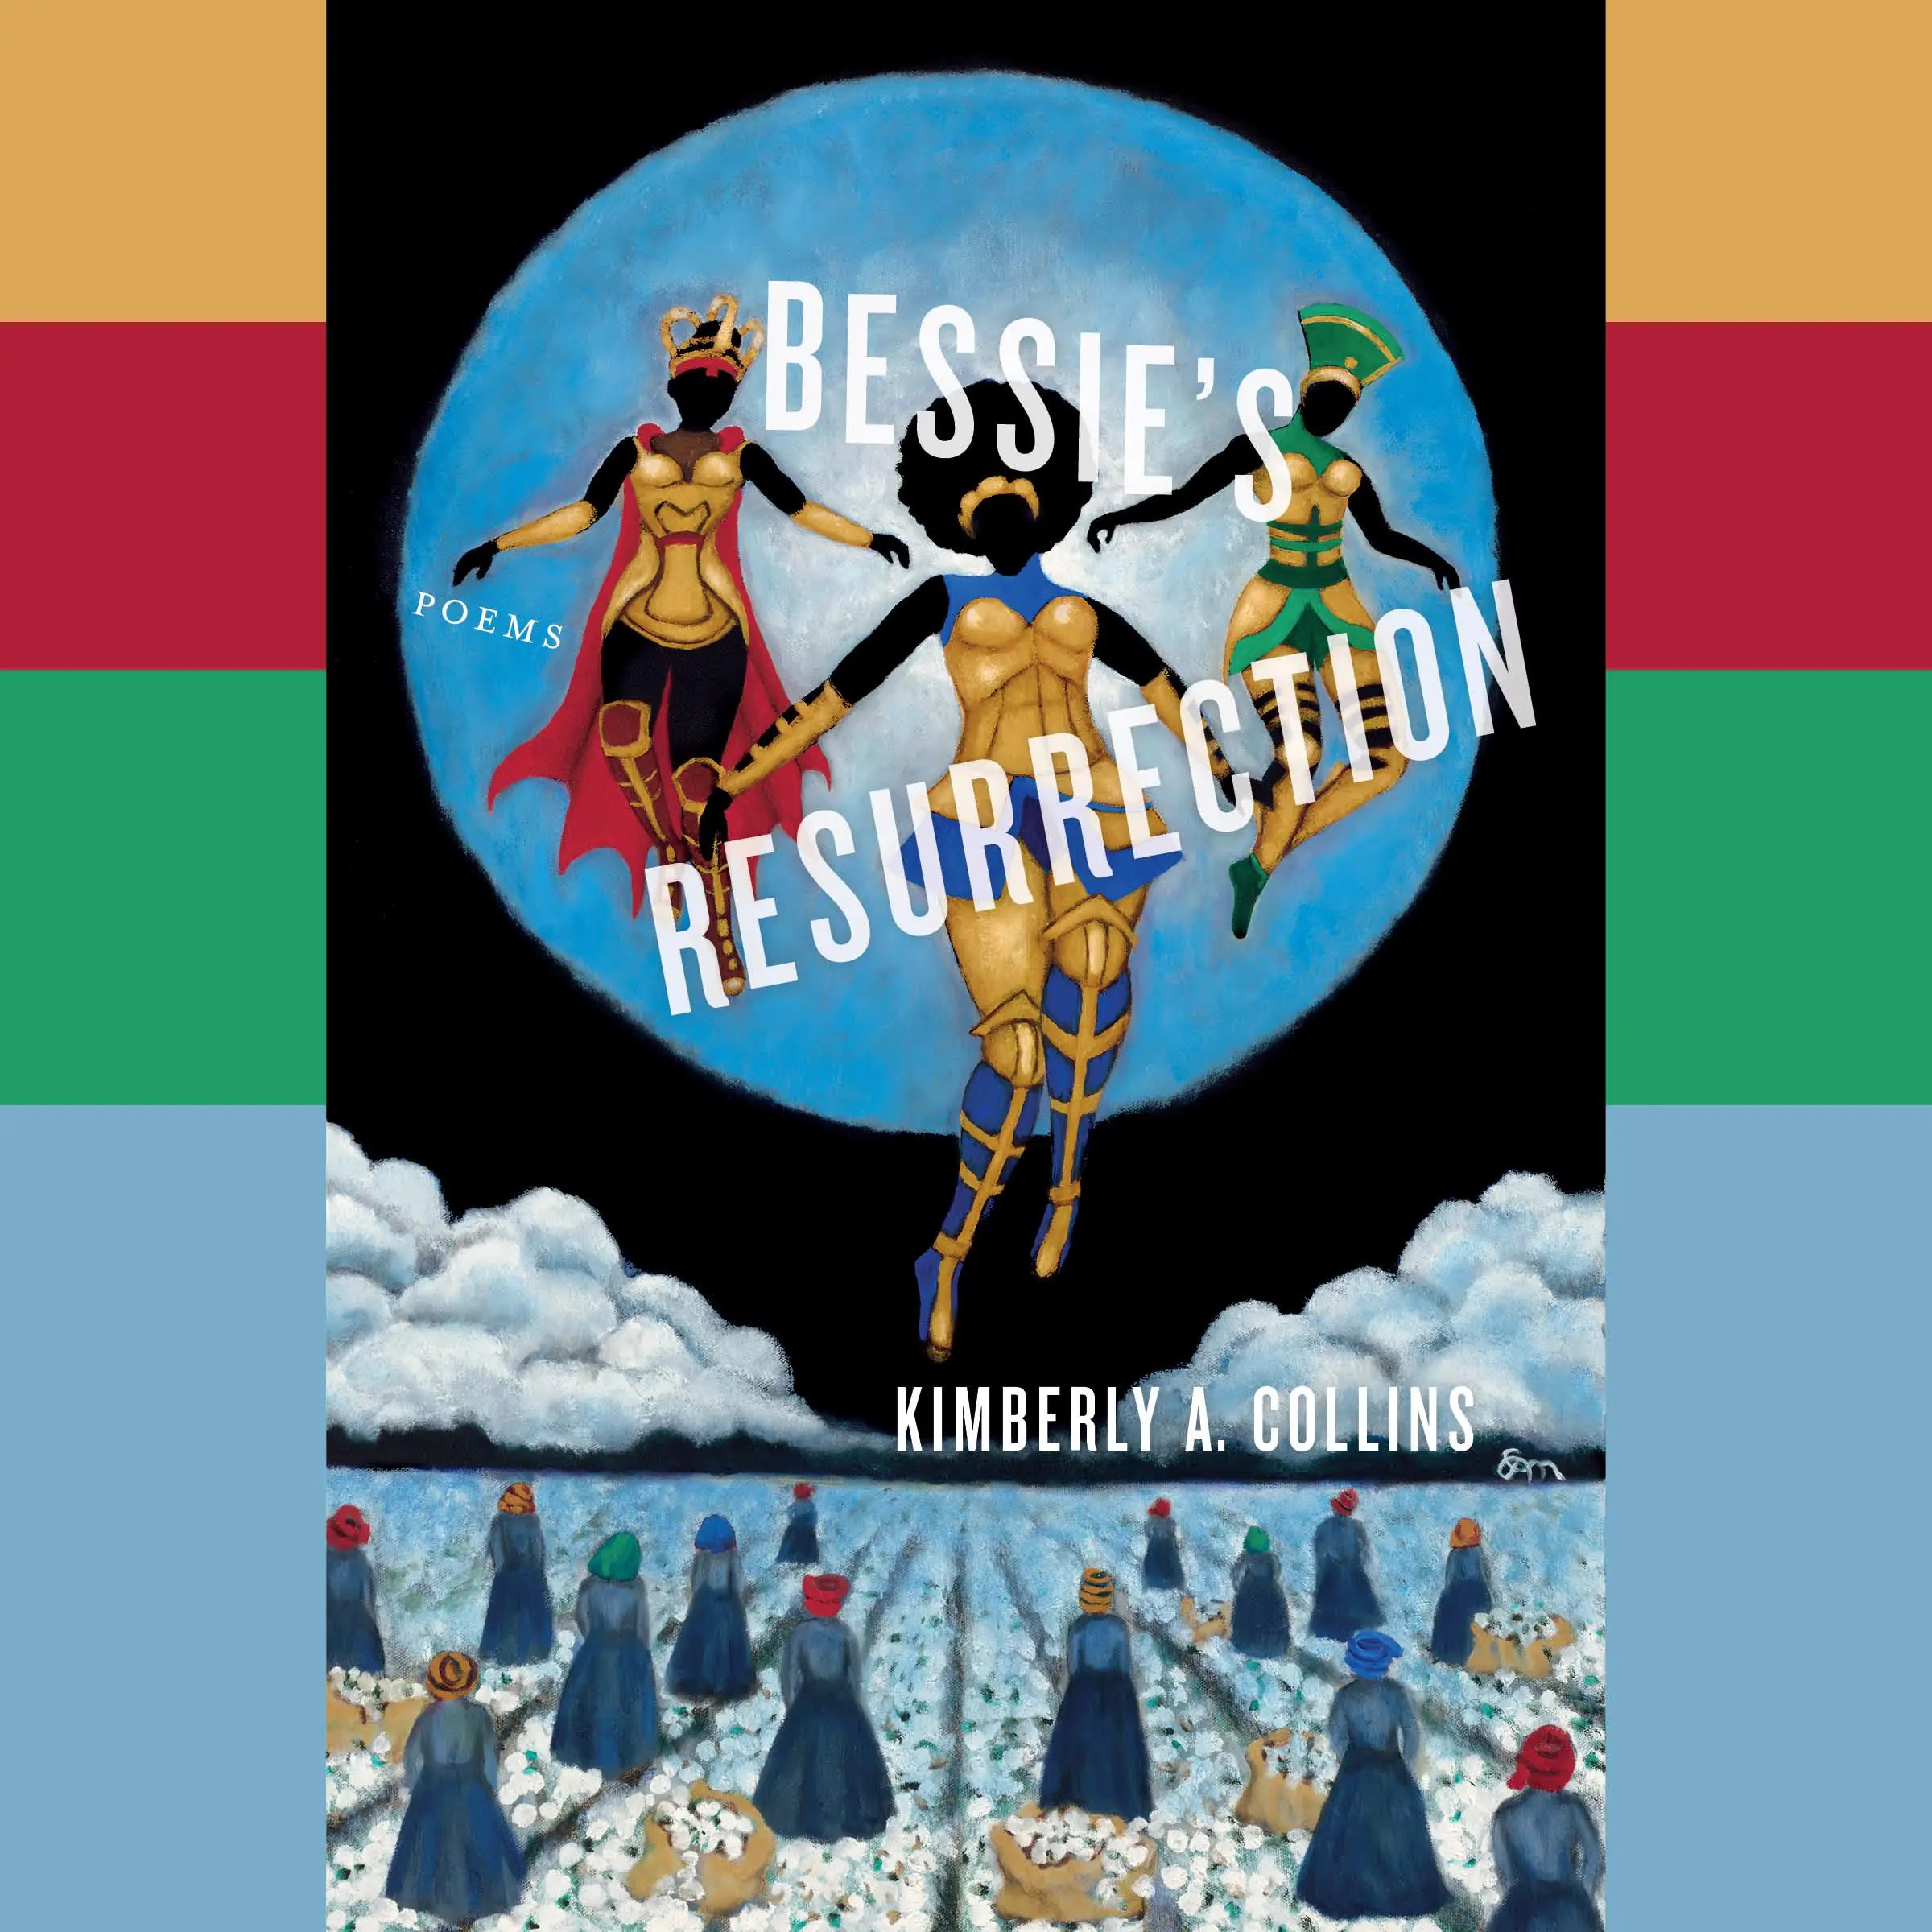 Bessie's Resurrection Audiobook by Kimberly A. Collins